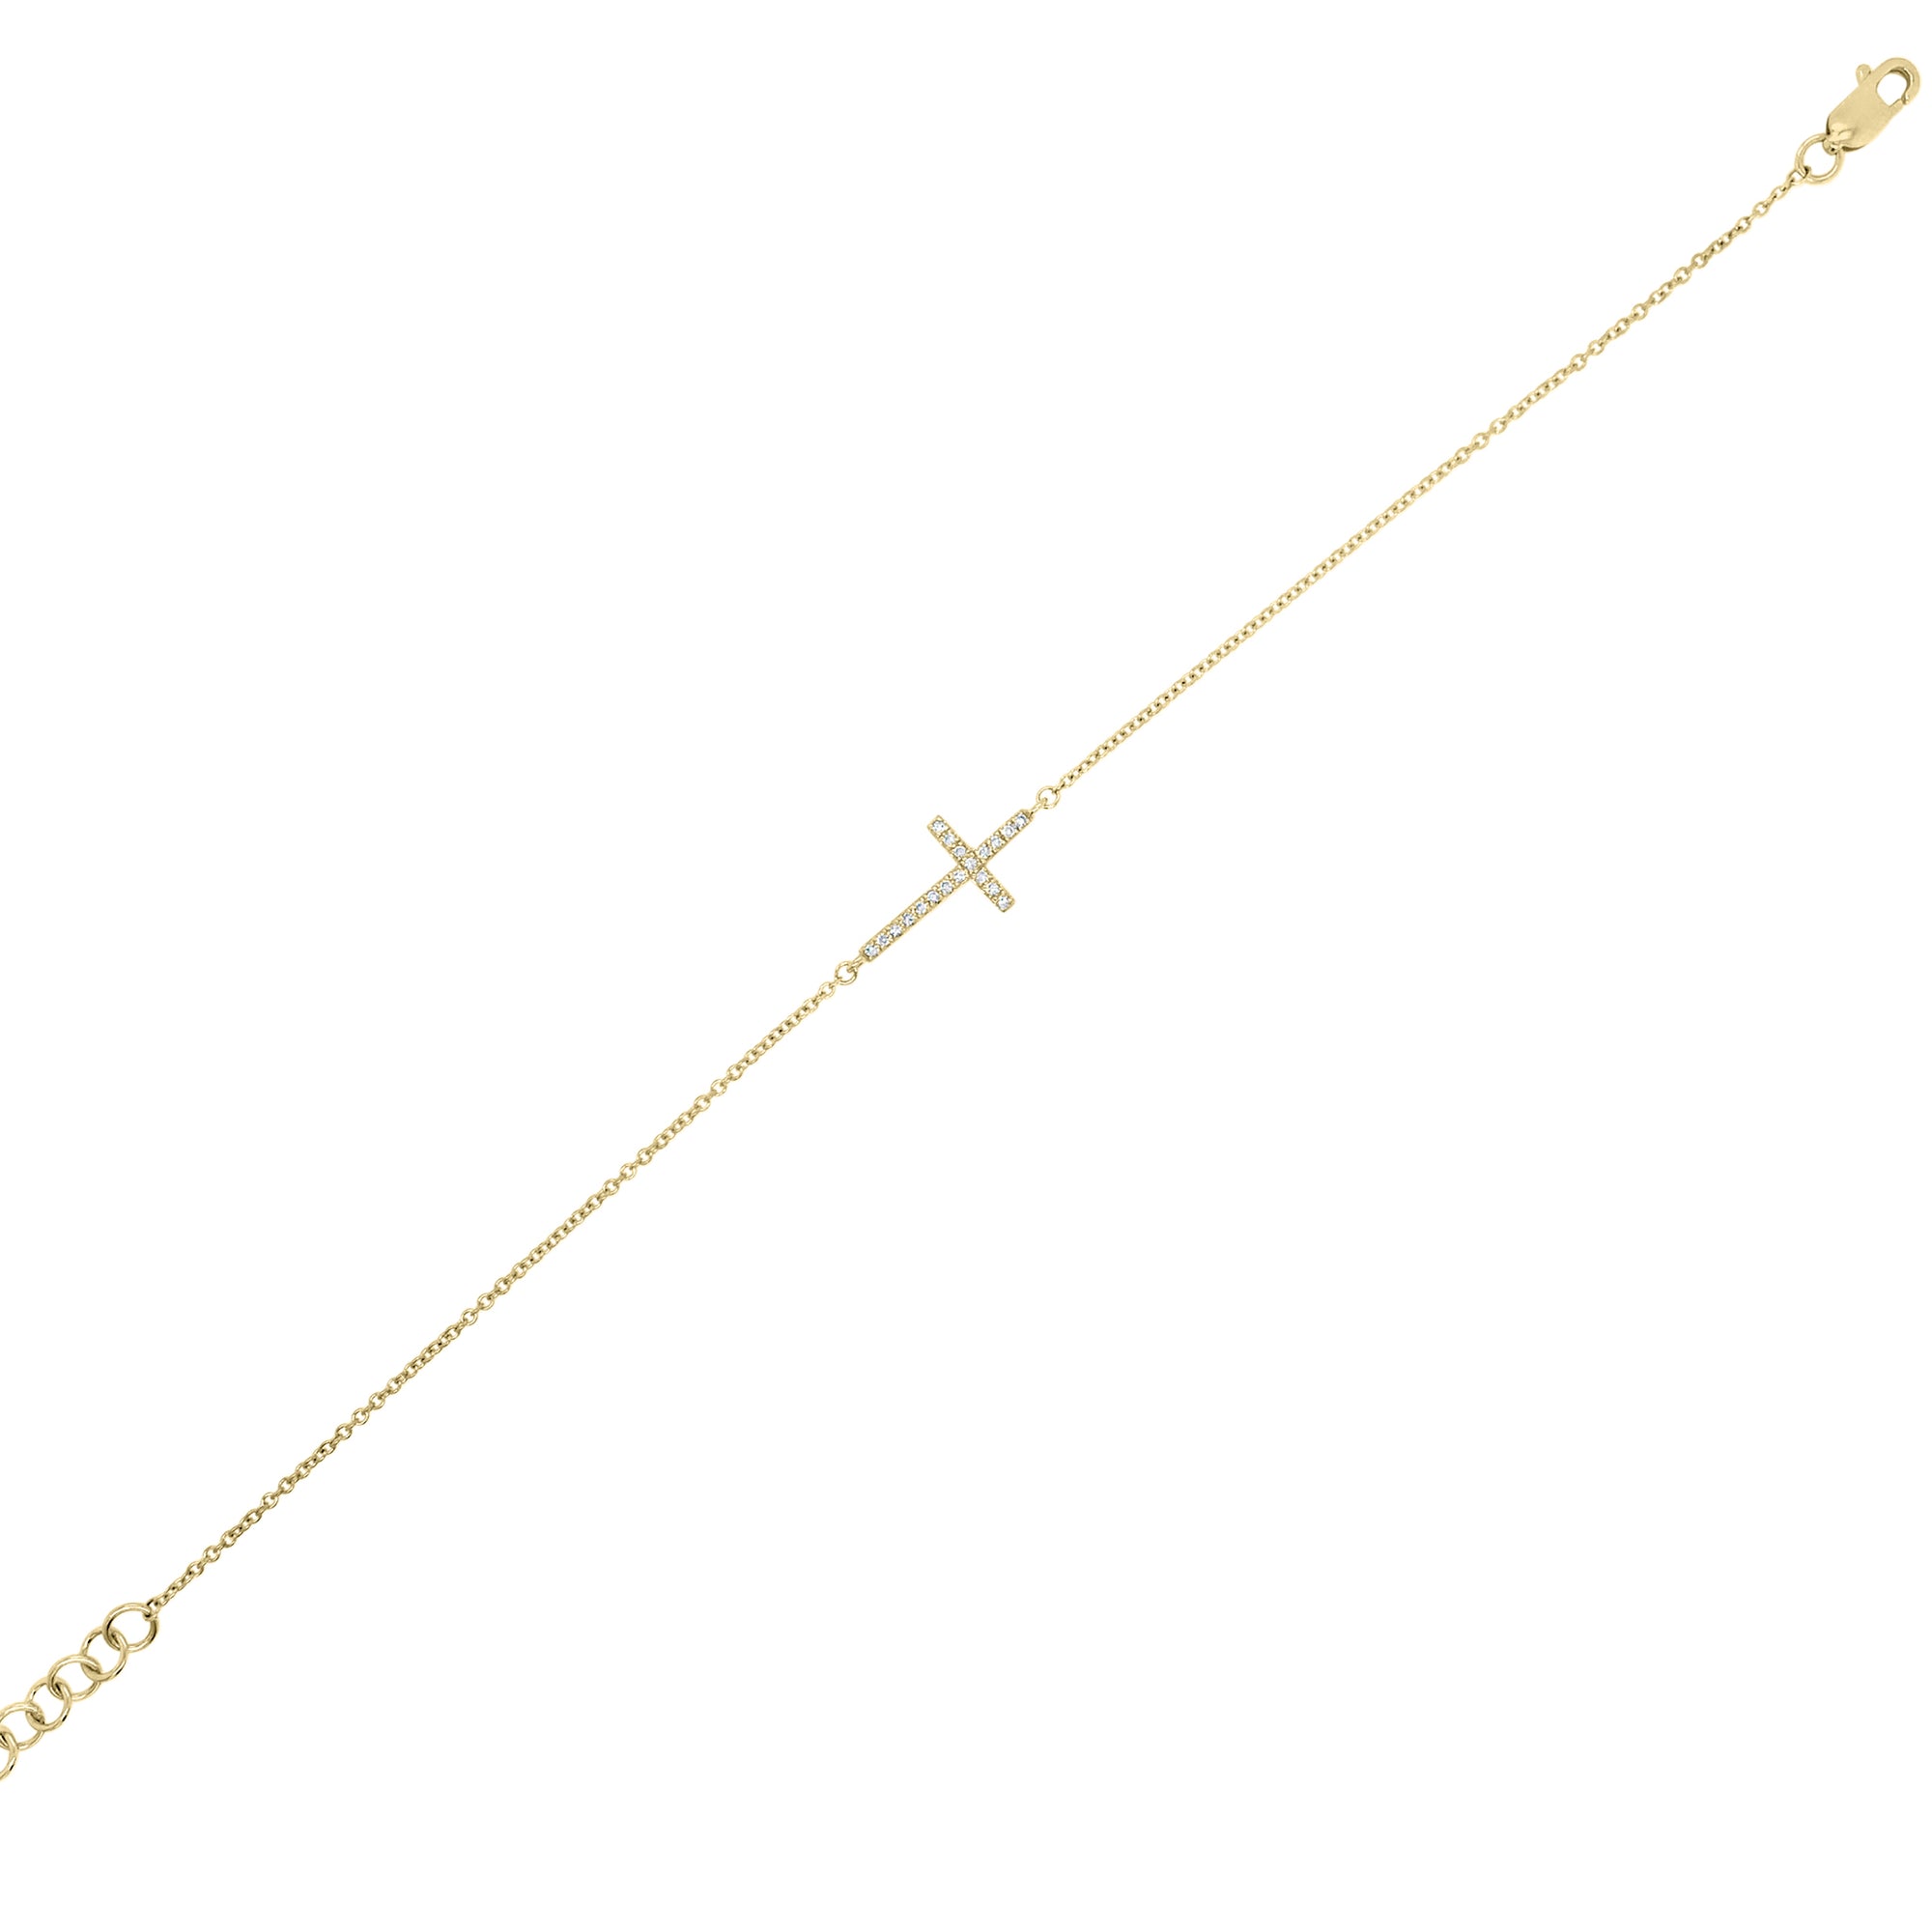 Diamond Cross Bracelet -Lobster clasp - 14K yellow gold cable chain - 14 KT 1.39GR -19 Round ,0.05 total carat weight